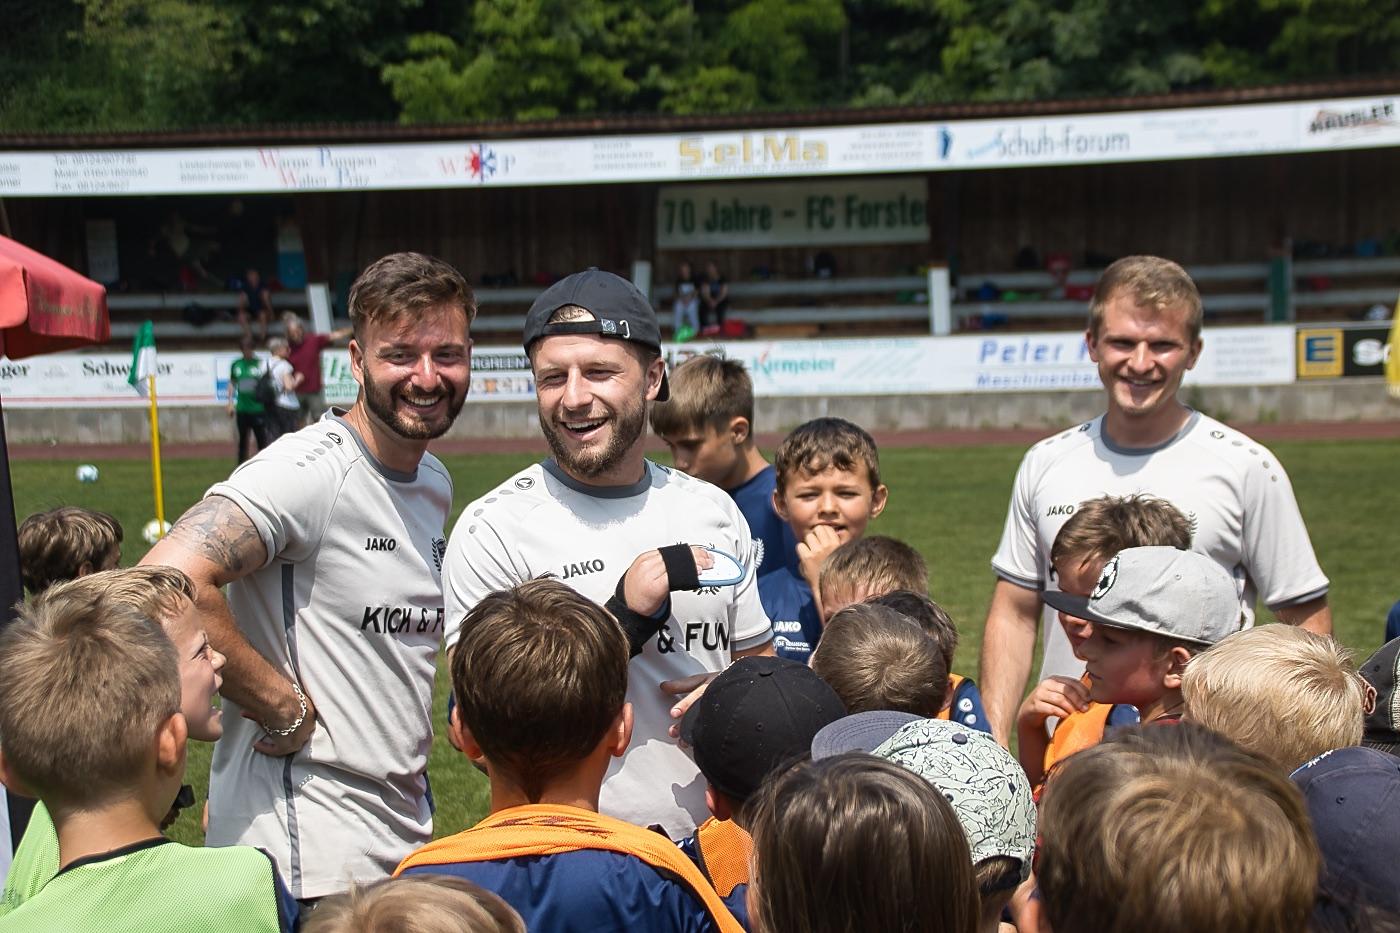 Read more about the article Kick & Fun Fußballcamp